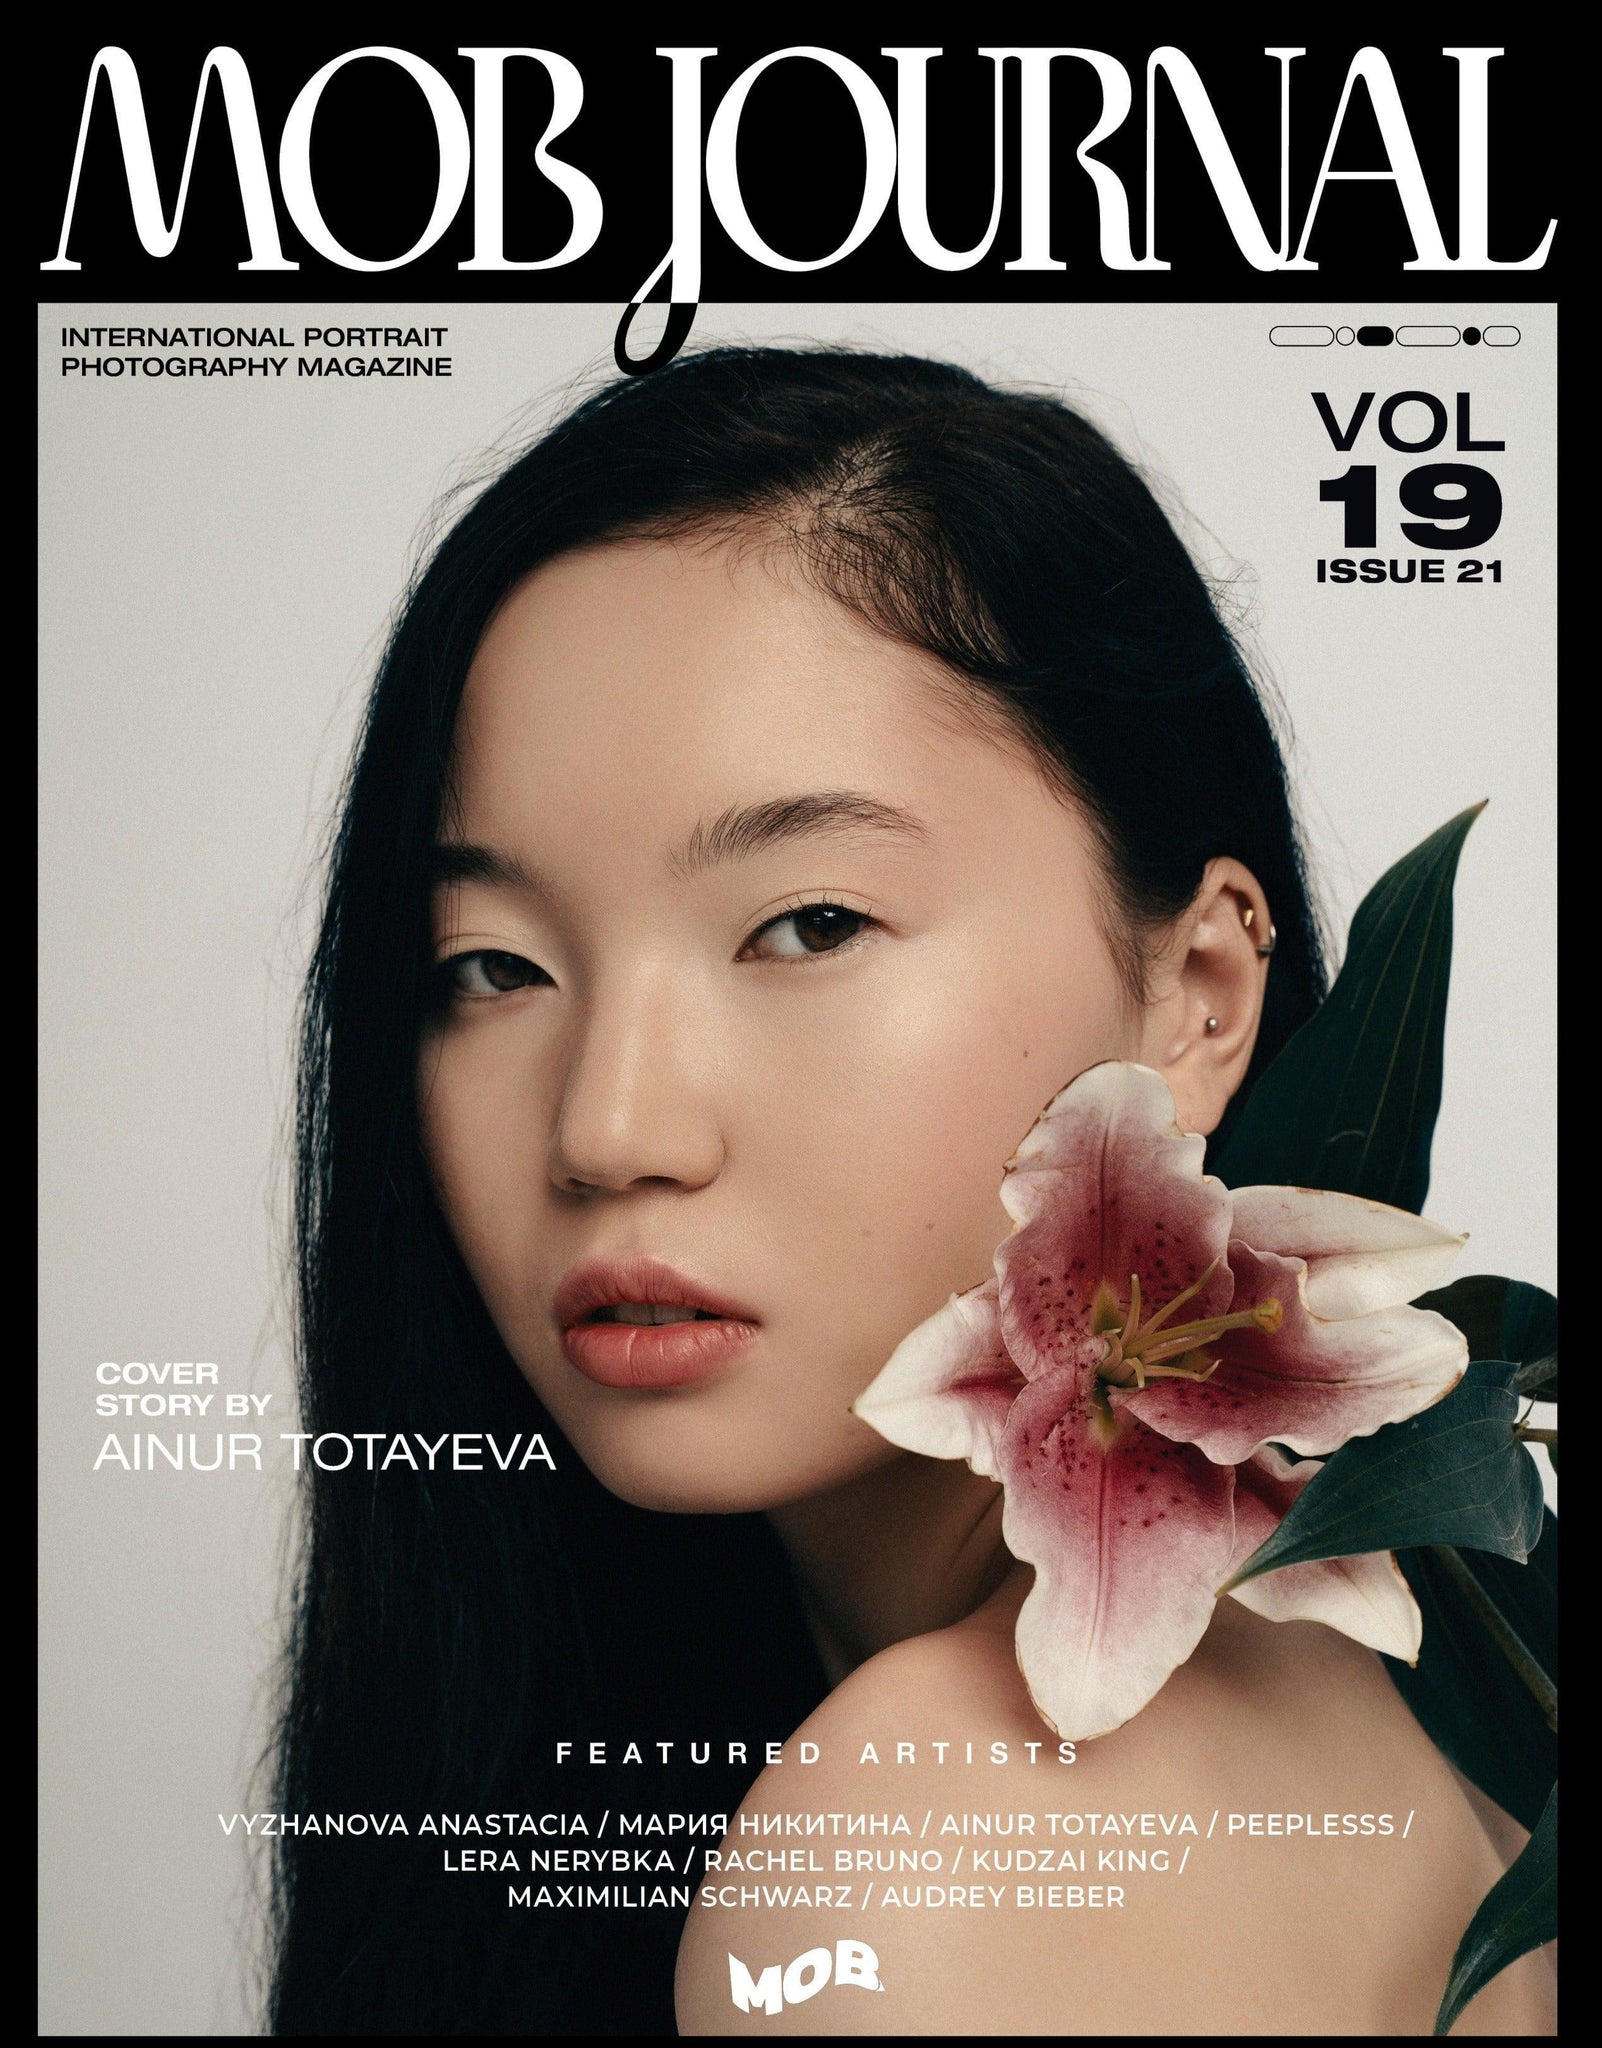 MOB JOURNAL | VOLUME NINETEEN | ISSUE #21 - Mob Journal